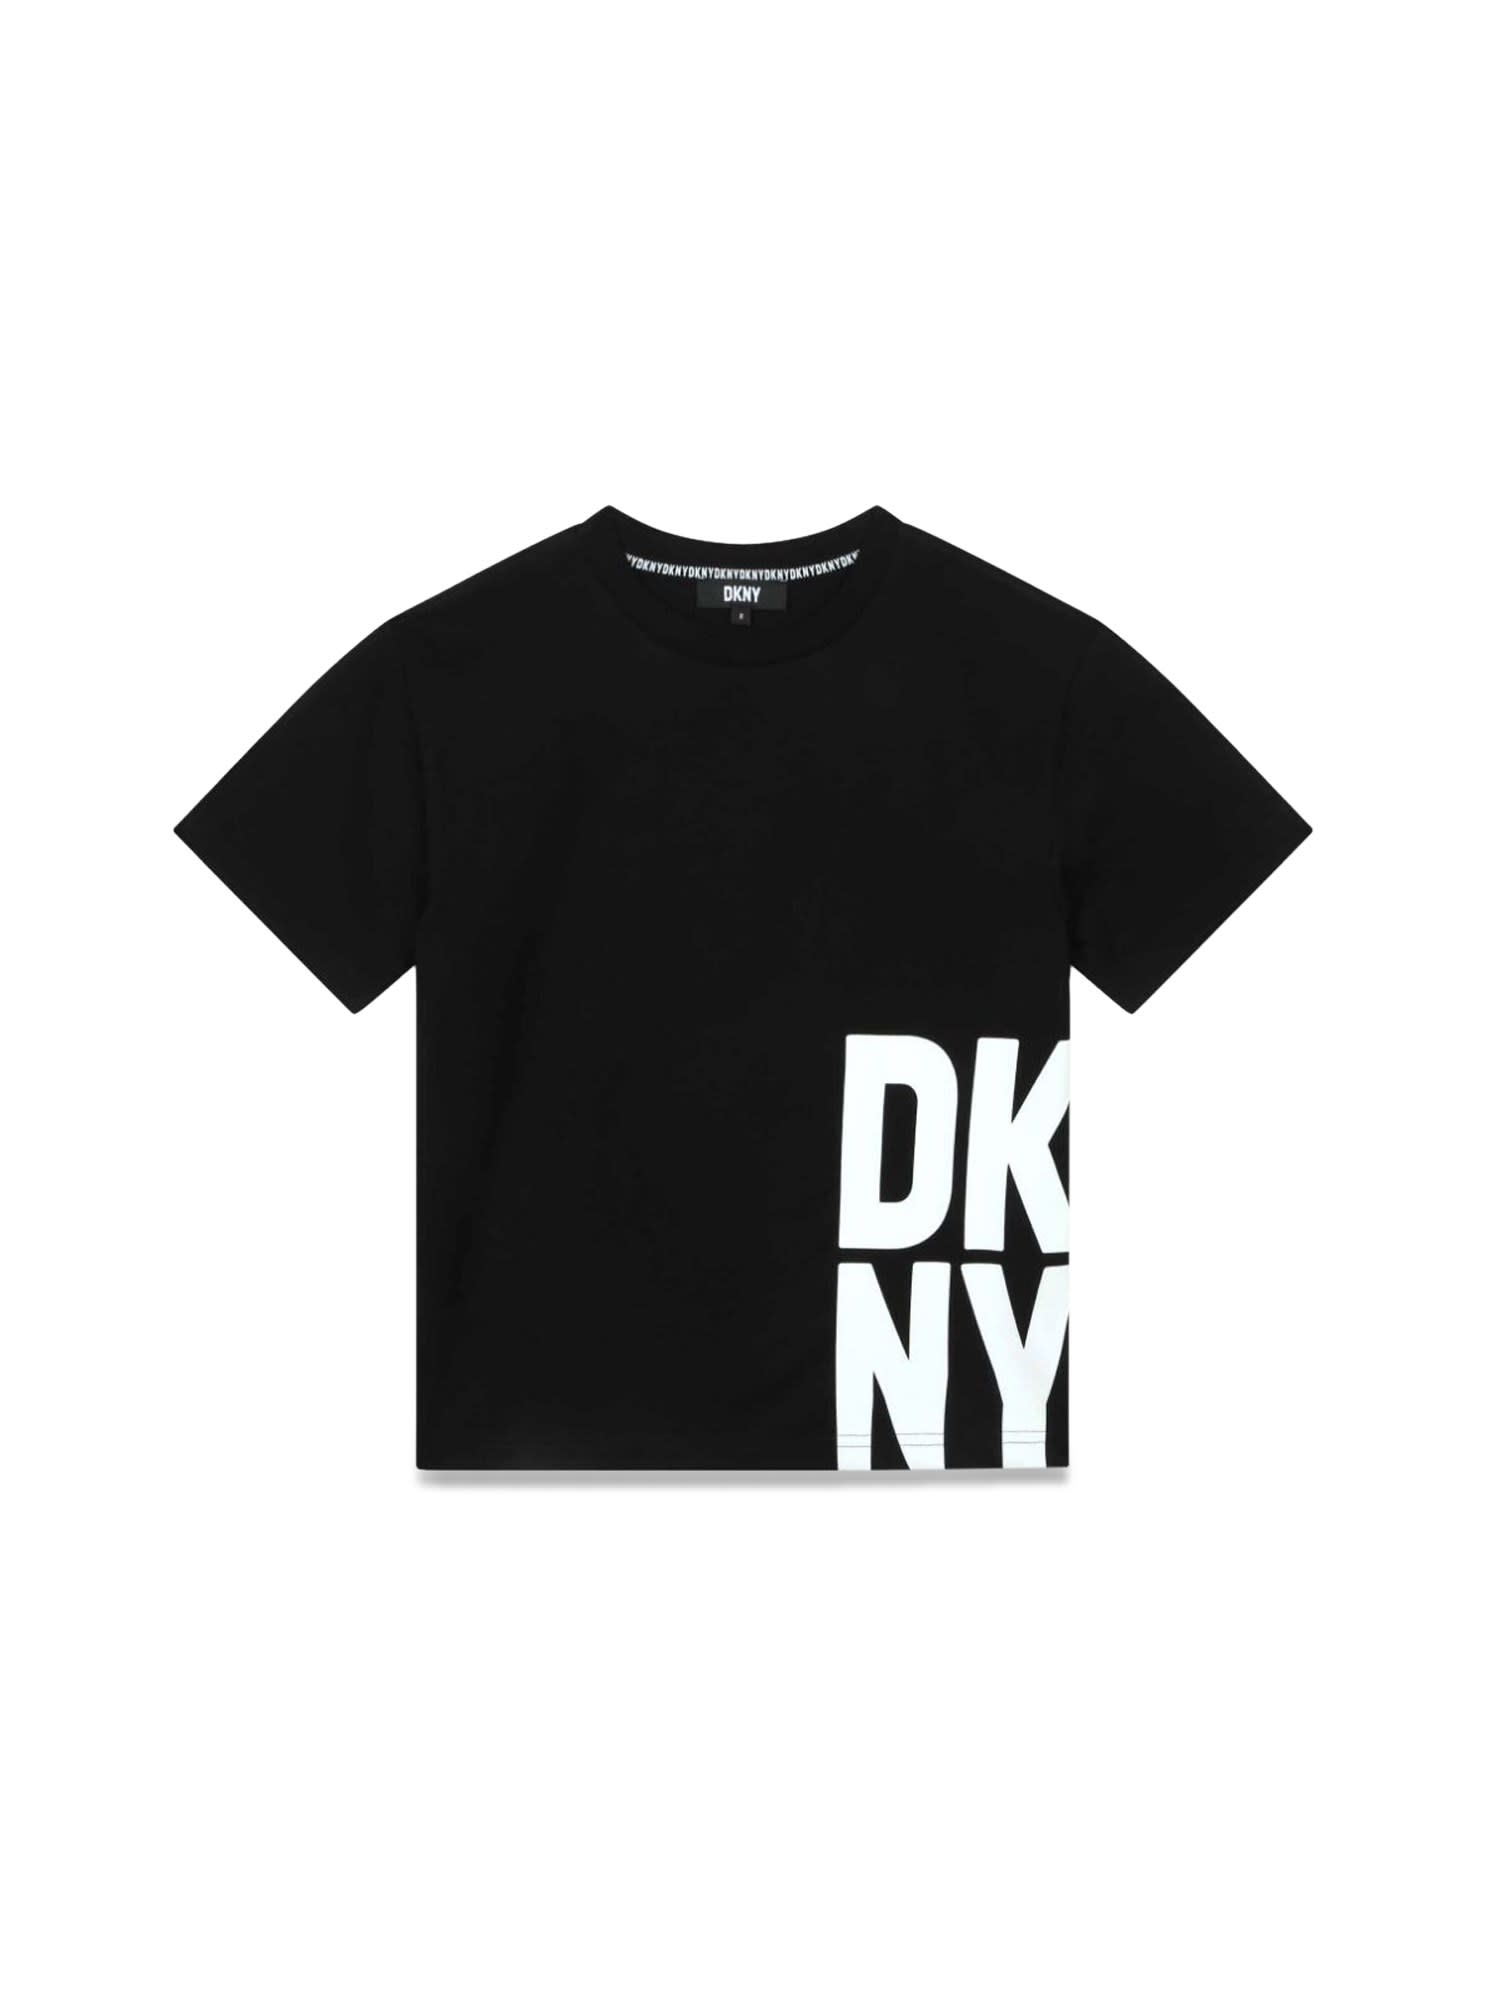 DKNY T-SHIRT WITH SIDE LOGO